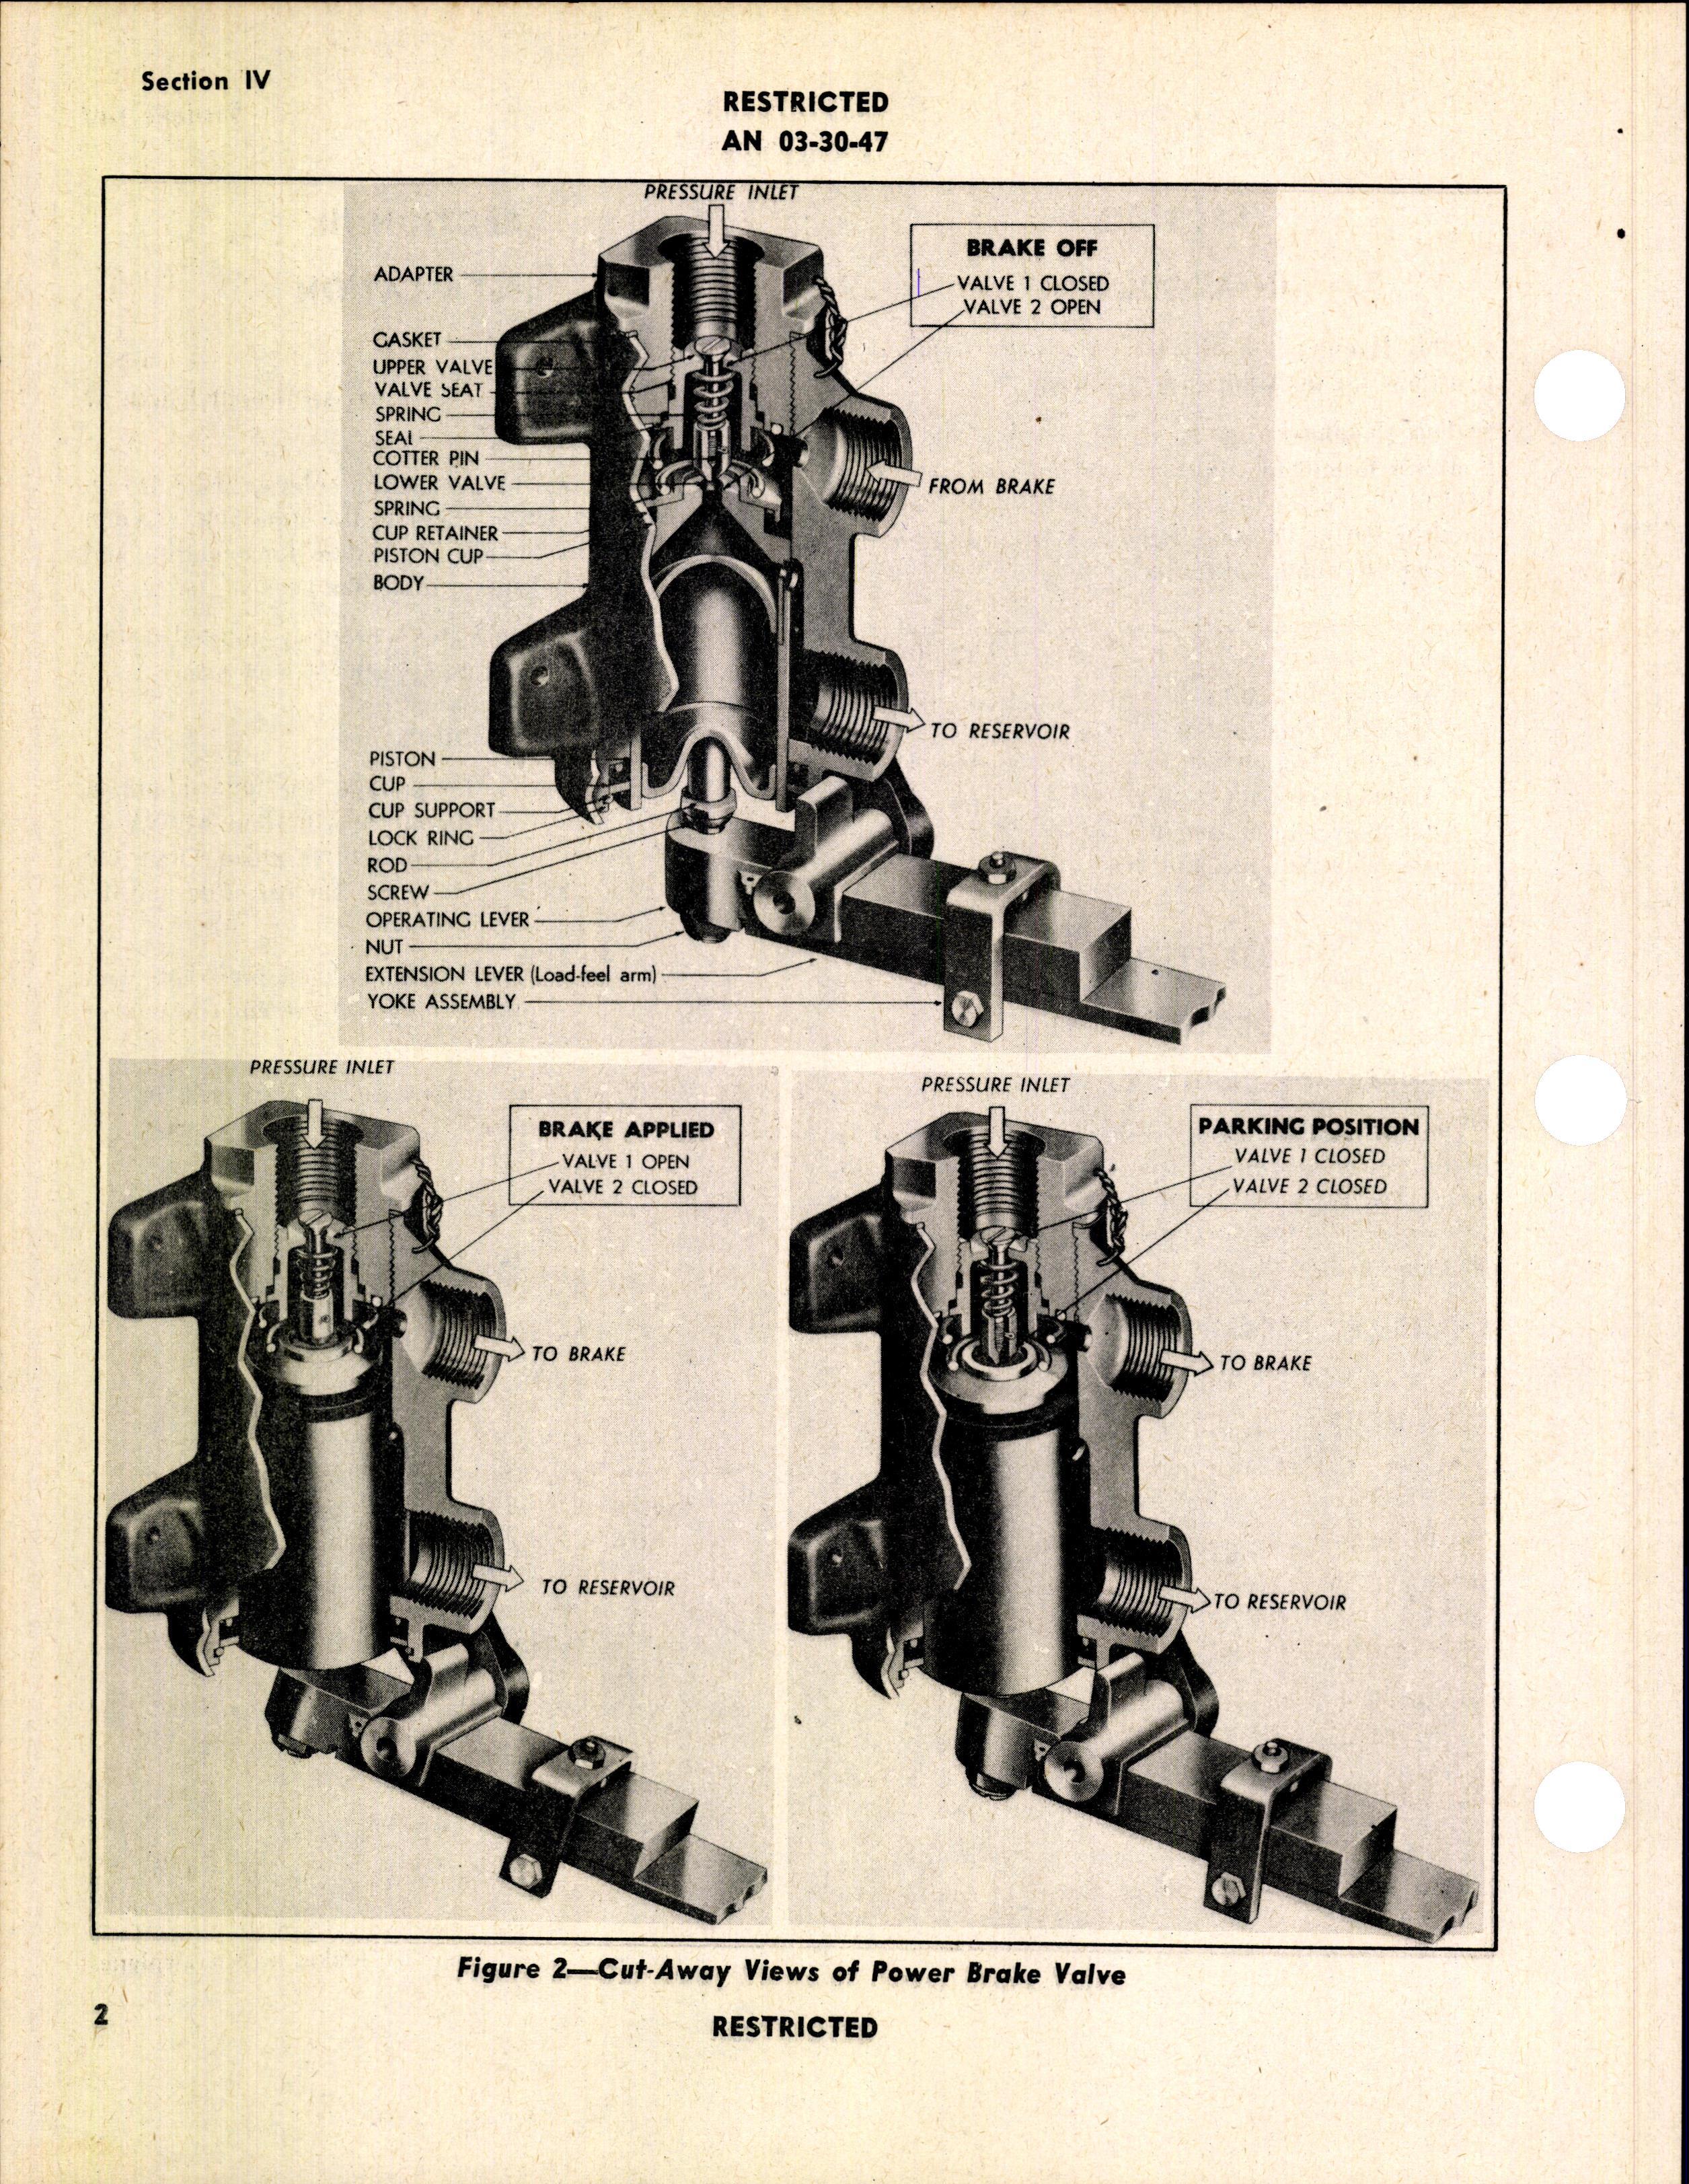 Sample page 6 from AirCorps Library document: Handbook of Instructions with Parts Catalog for Power Brake Valves